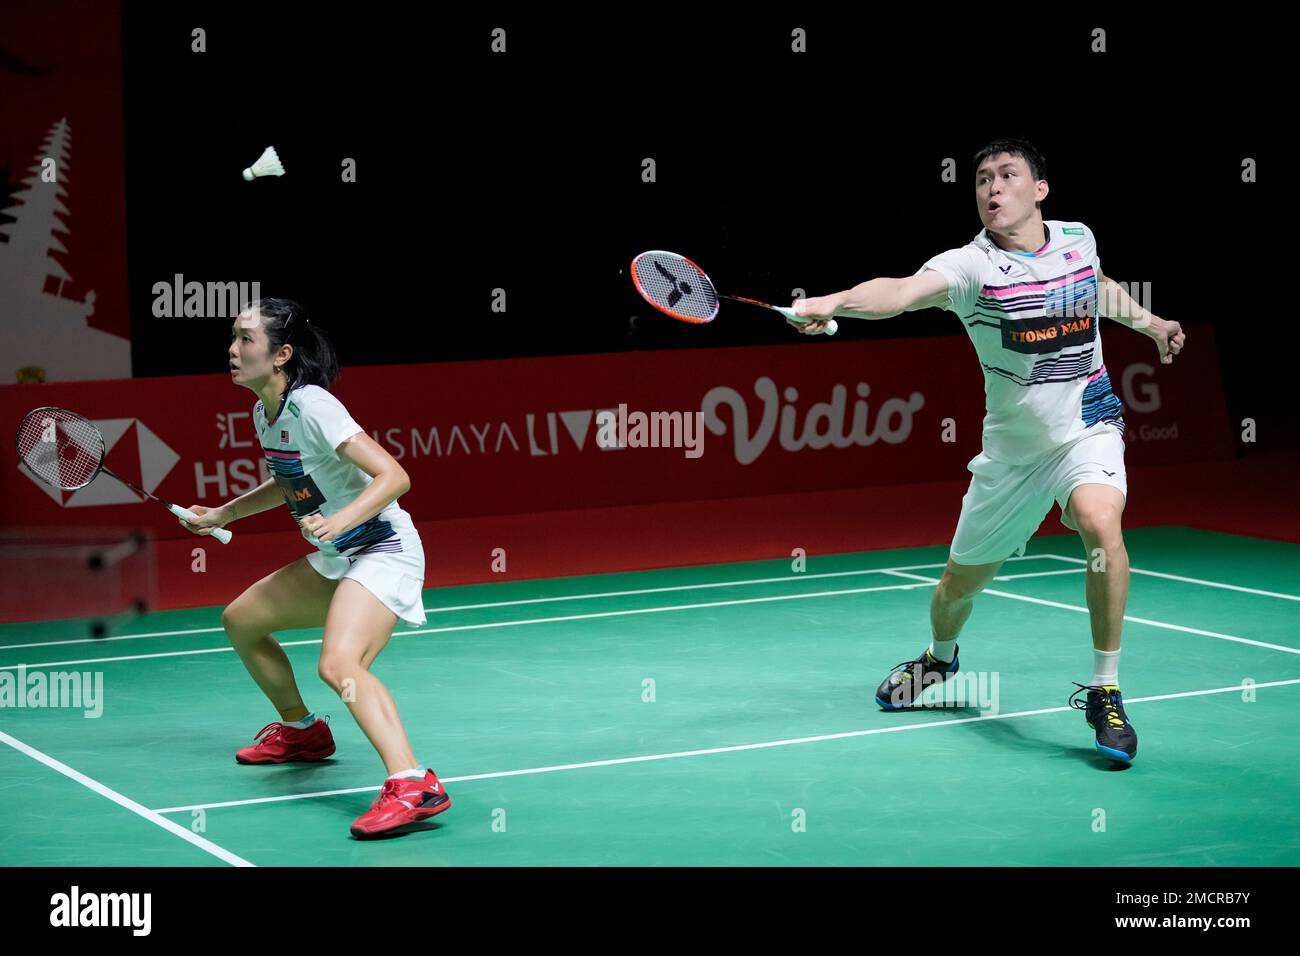 Denmarks Mathias Christiansen, right, and Alexandra Boje compete against Malaysias Tan Kian Meng and Lai Pei Jing during their mixed doubles first round match at Indonesia Open badminton tournament at Istora Gelora